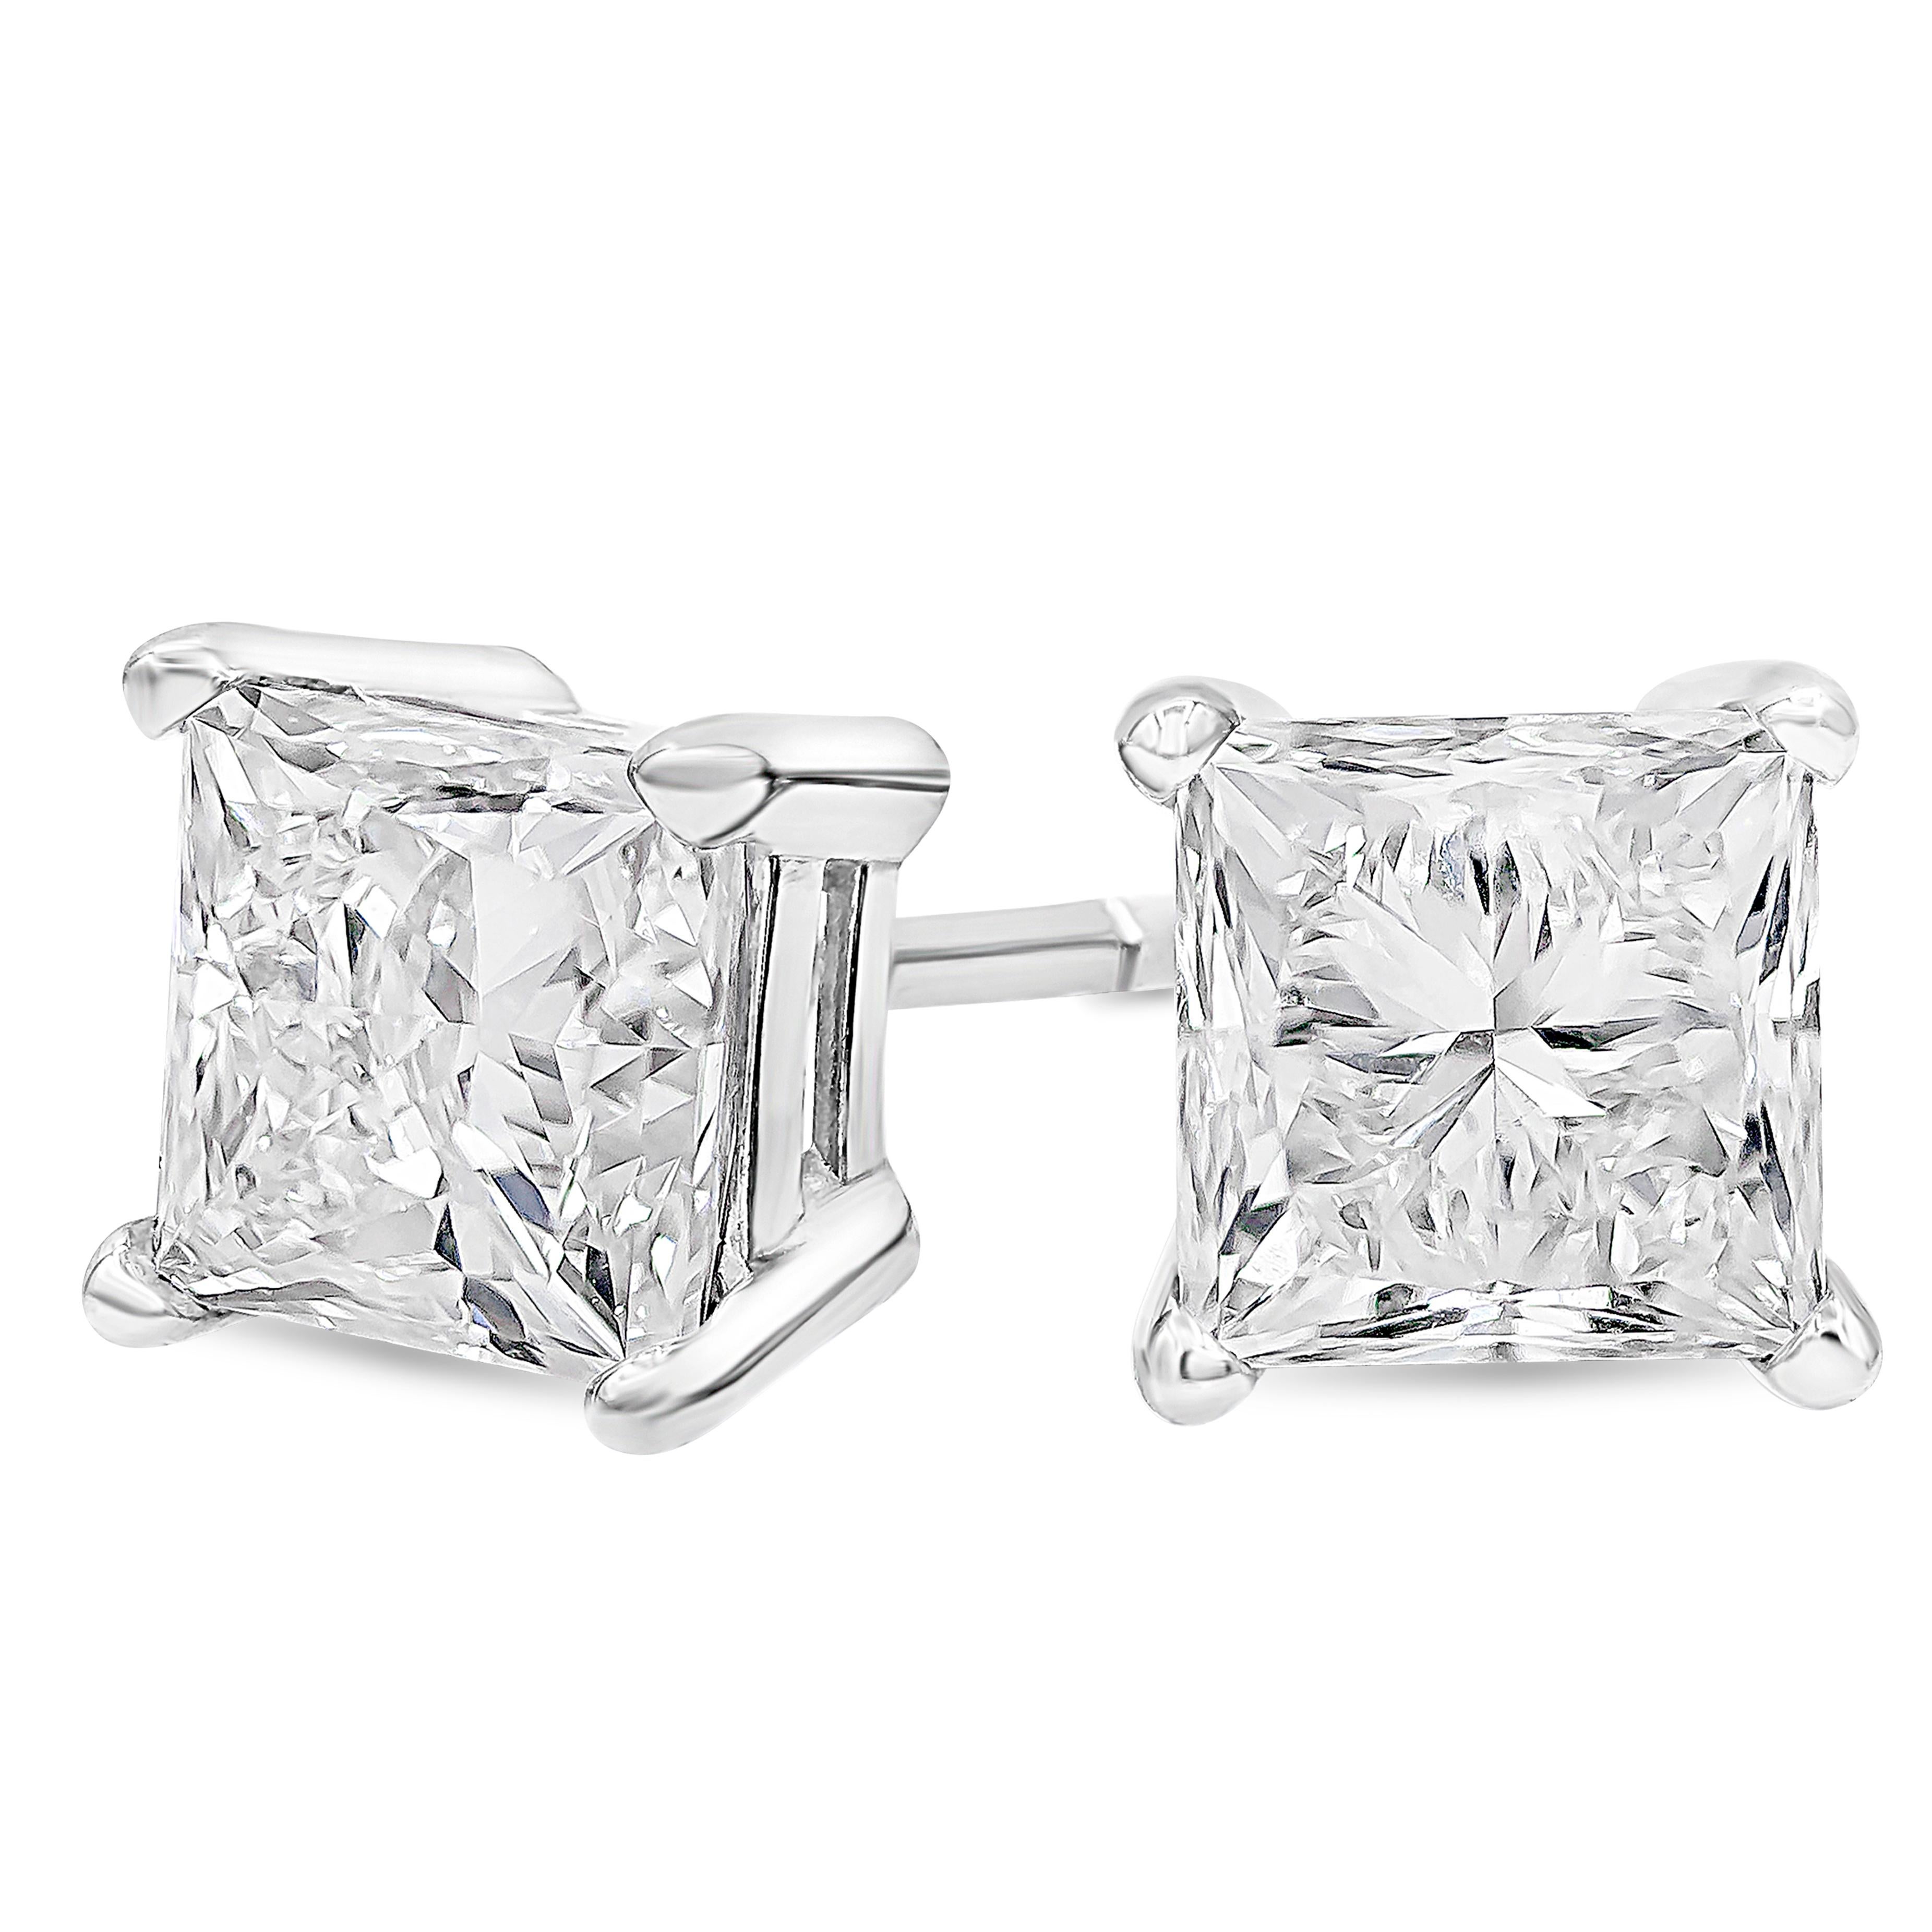 A stunning and simple stud earrings showcasing 1.04 carats total princess cut diamonds, H Color and VS1 in Clarity. Set in a timeless four prong setting, Made in 18K White Gold.

Roman Malakov is a custom house, specializing in creating anything you